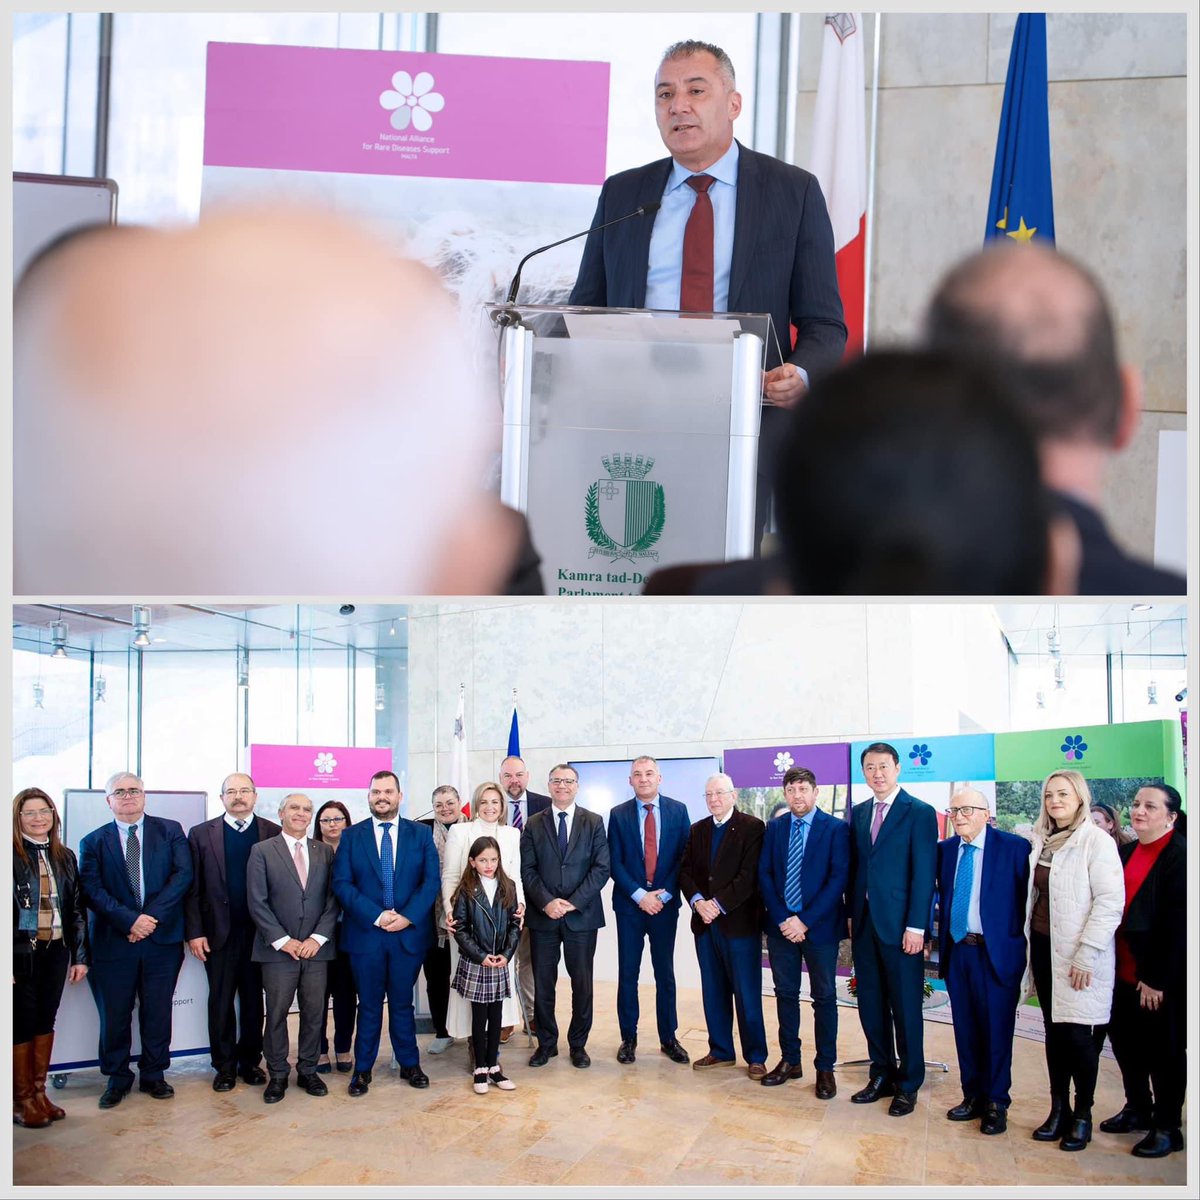 This morning I attended the launch of the #annual #rare #disease #awareness #campaign. 🤝🏻Together we want to work so that #patients have access to the best treatment, #care and #research.